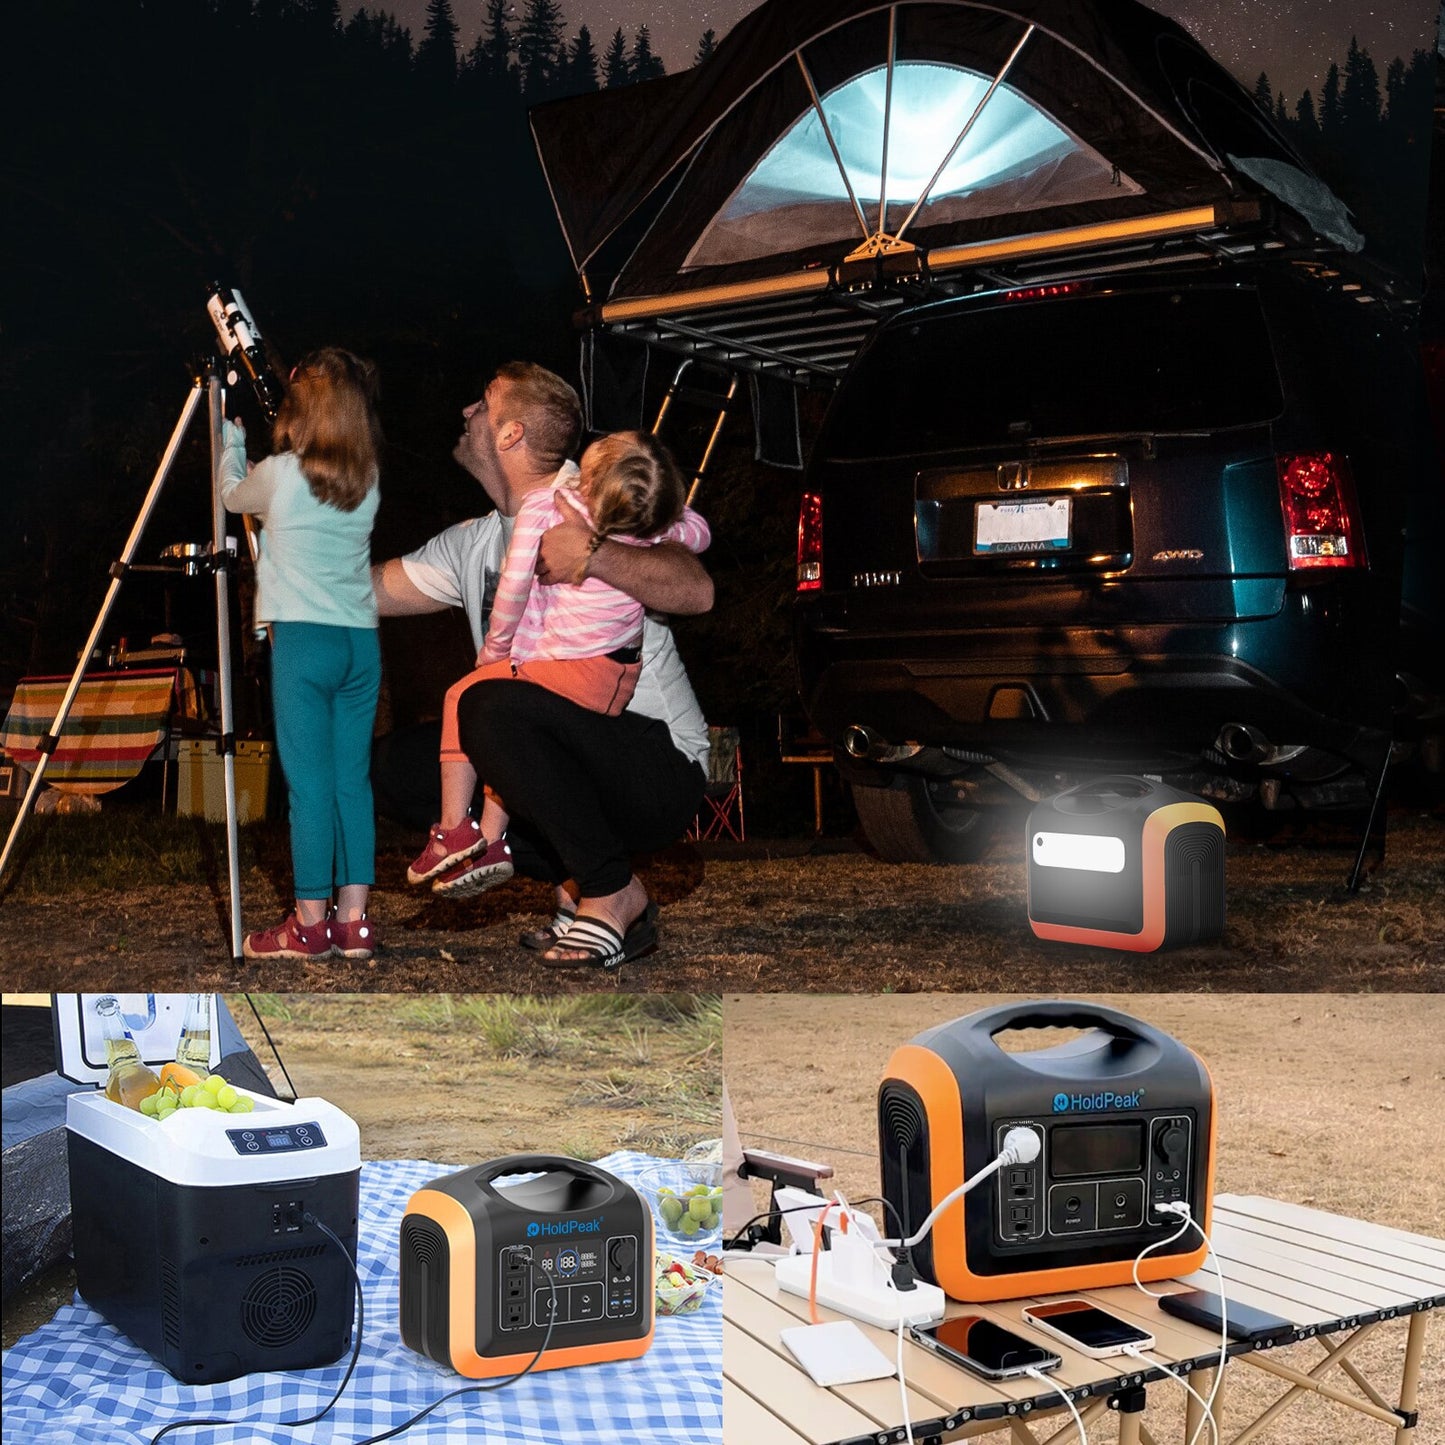 1200W Solar Generator Portable Battery Backup 110V AC Outlet ,LED Quick Charge Powerbank for Home Camping Outdoors Travel